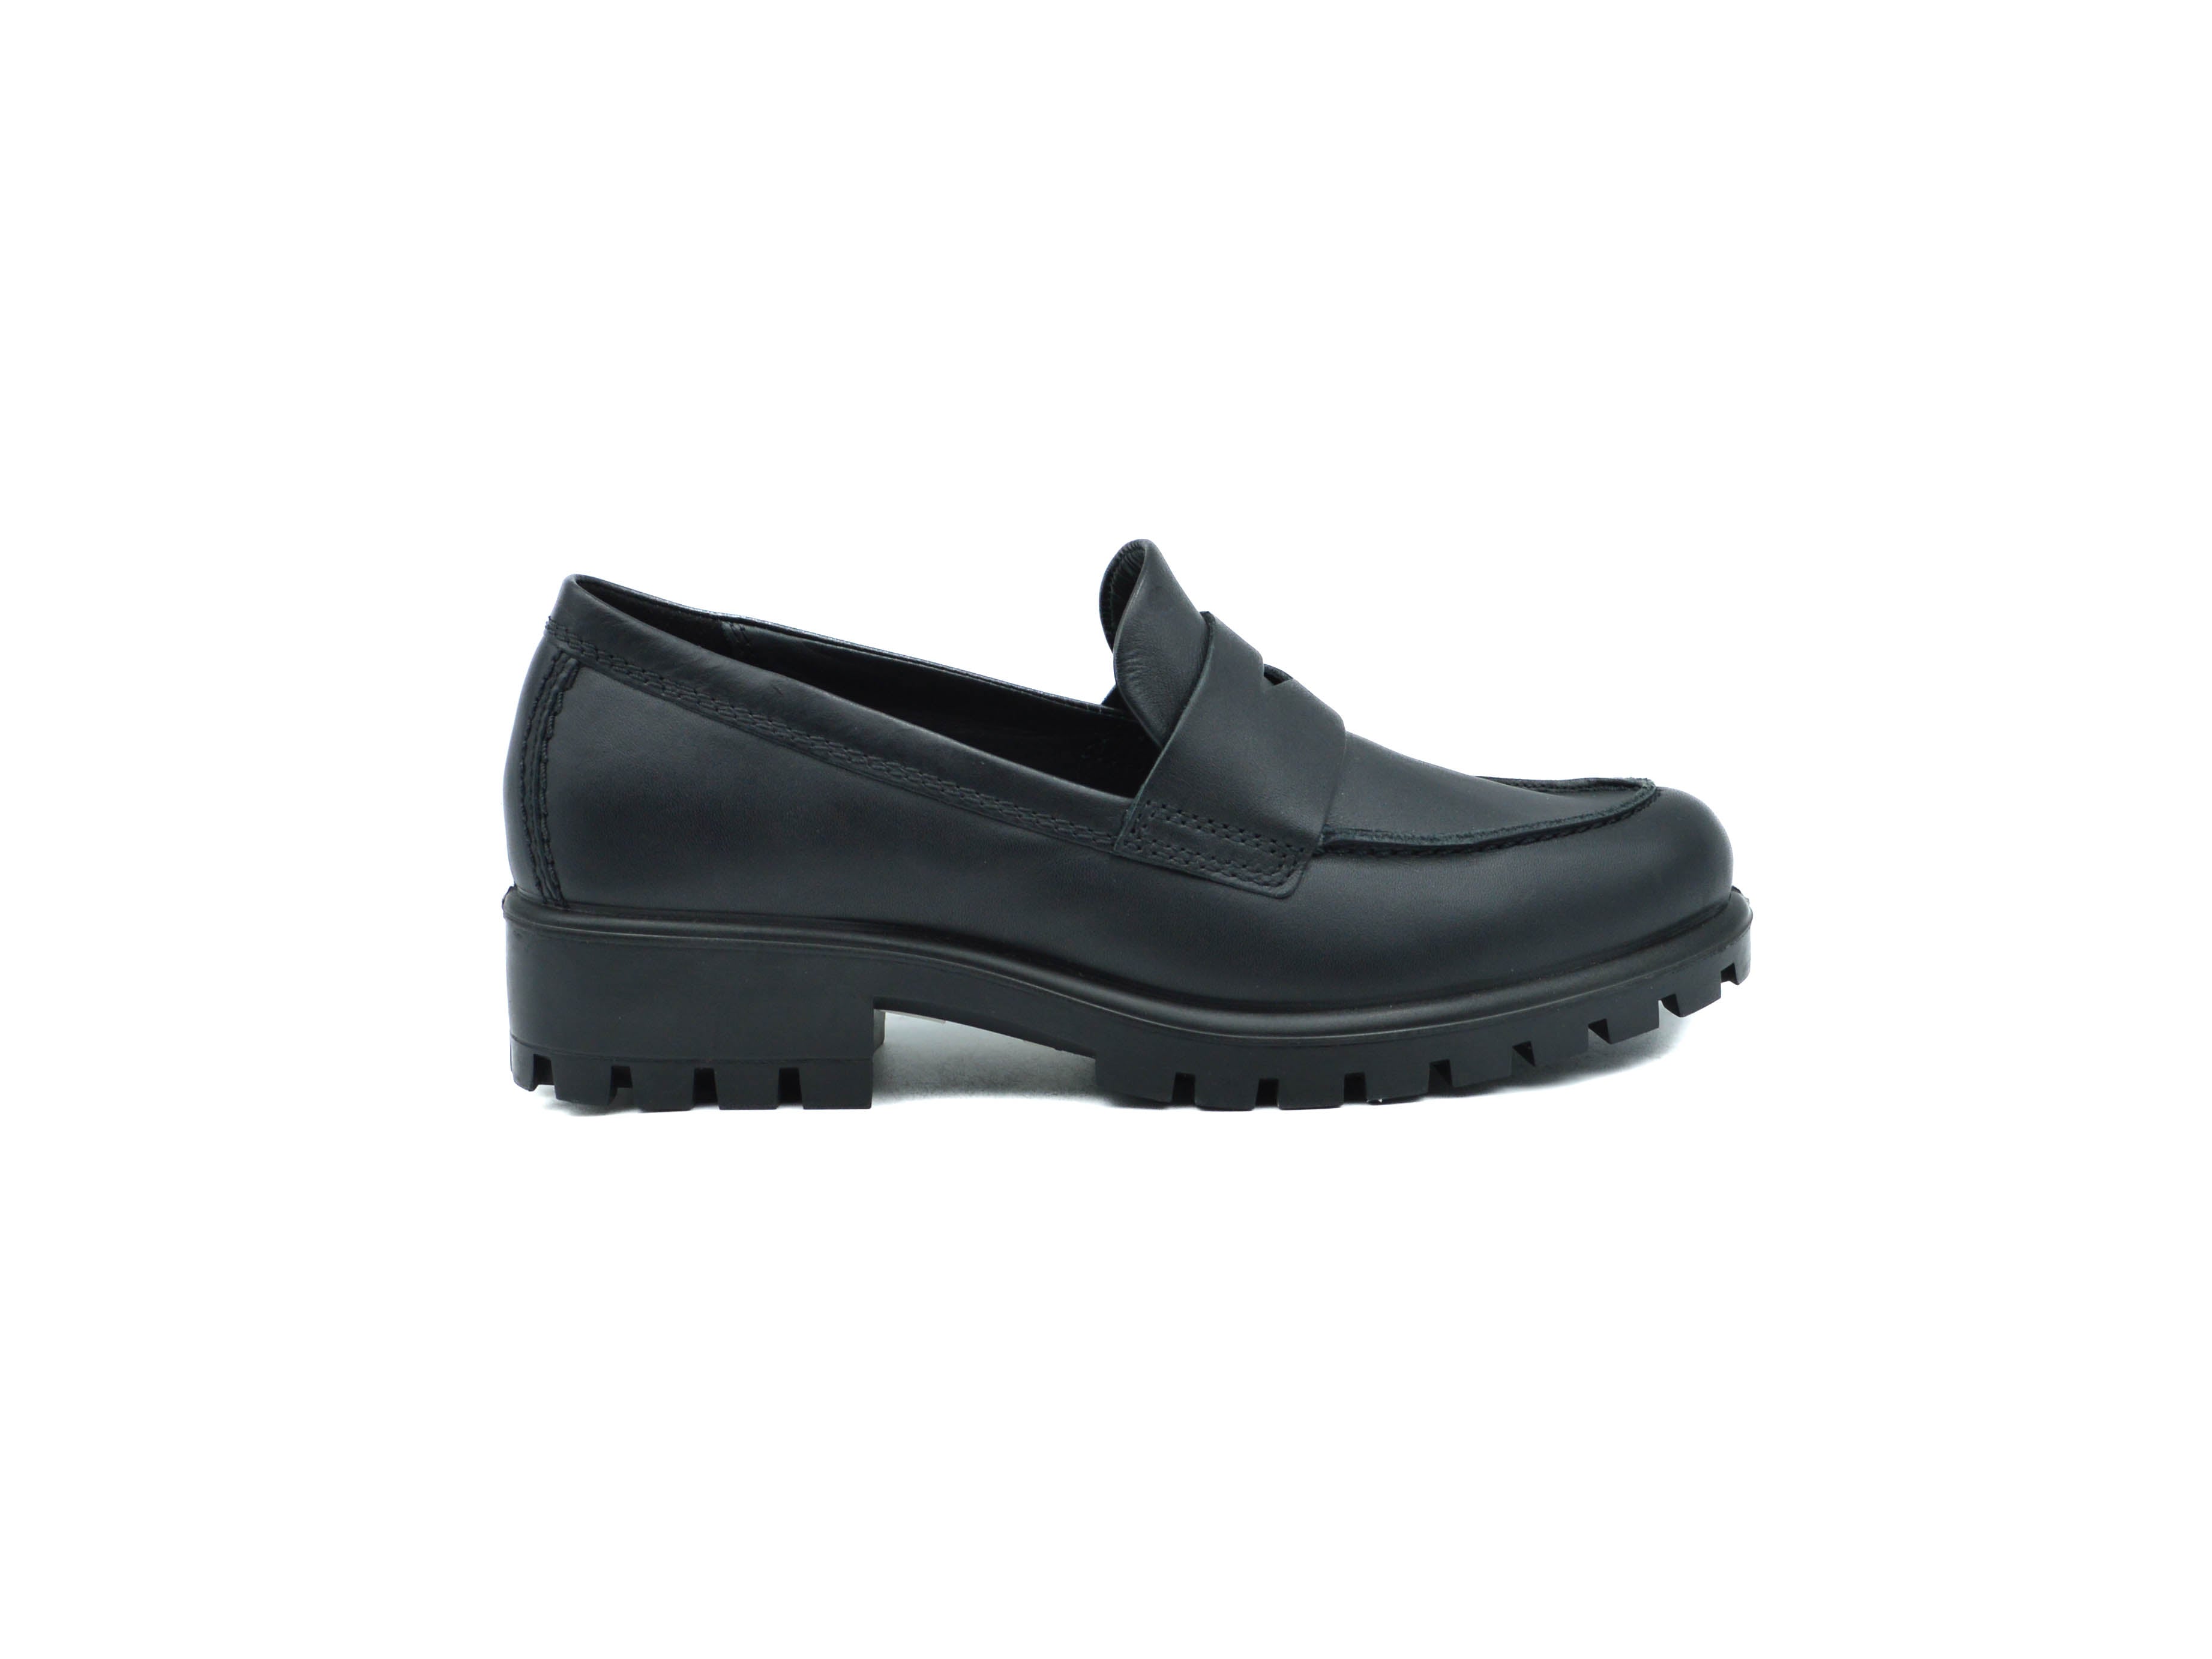 ECCO Loafer Modtray